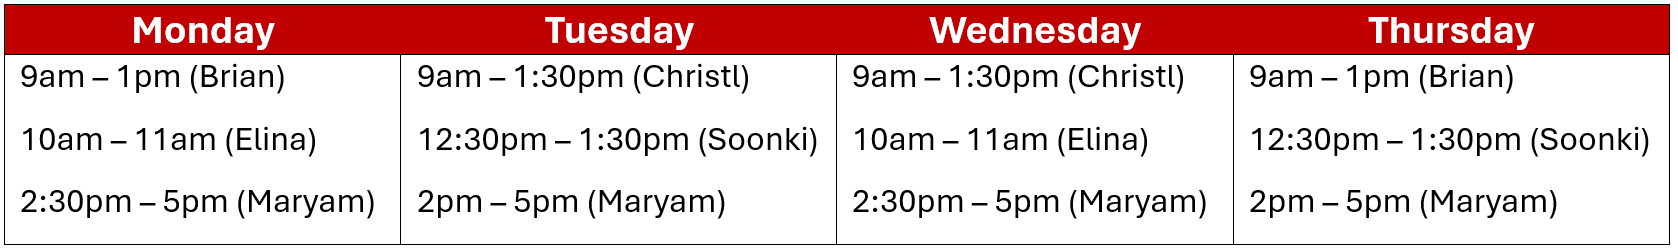 Image with tutoring schedule. On Monday, available tutors are: 9am – 1pm (Brian) 10am – 11am (Elina) 2:30pm – 5pm (Maryam) On Tuesday: 9am – 1:30pm (Christl) 12:30pm – 1:30pm (Soonki) 2pm – 5pm (Maryam) On Wednesday 9am – 1:30pm (Christl) 10am – 11am (Elina) 2:30pm – 5pm (Maryam) . On Thursday 9am – 1pm (Brian) 12:30pm – 1:30pm (Soonki) 2pm – 5pm (Maryam)